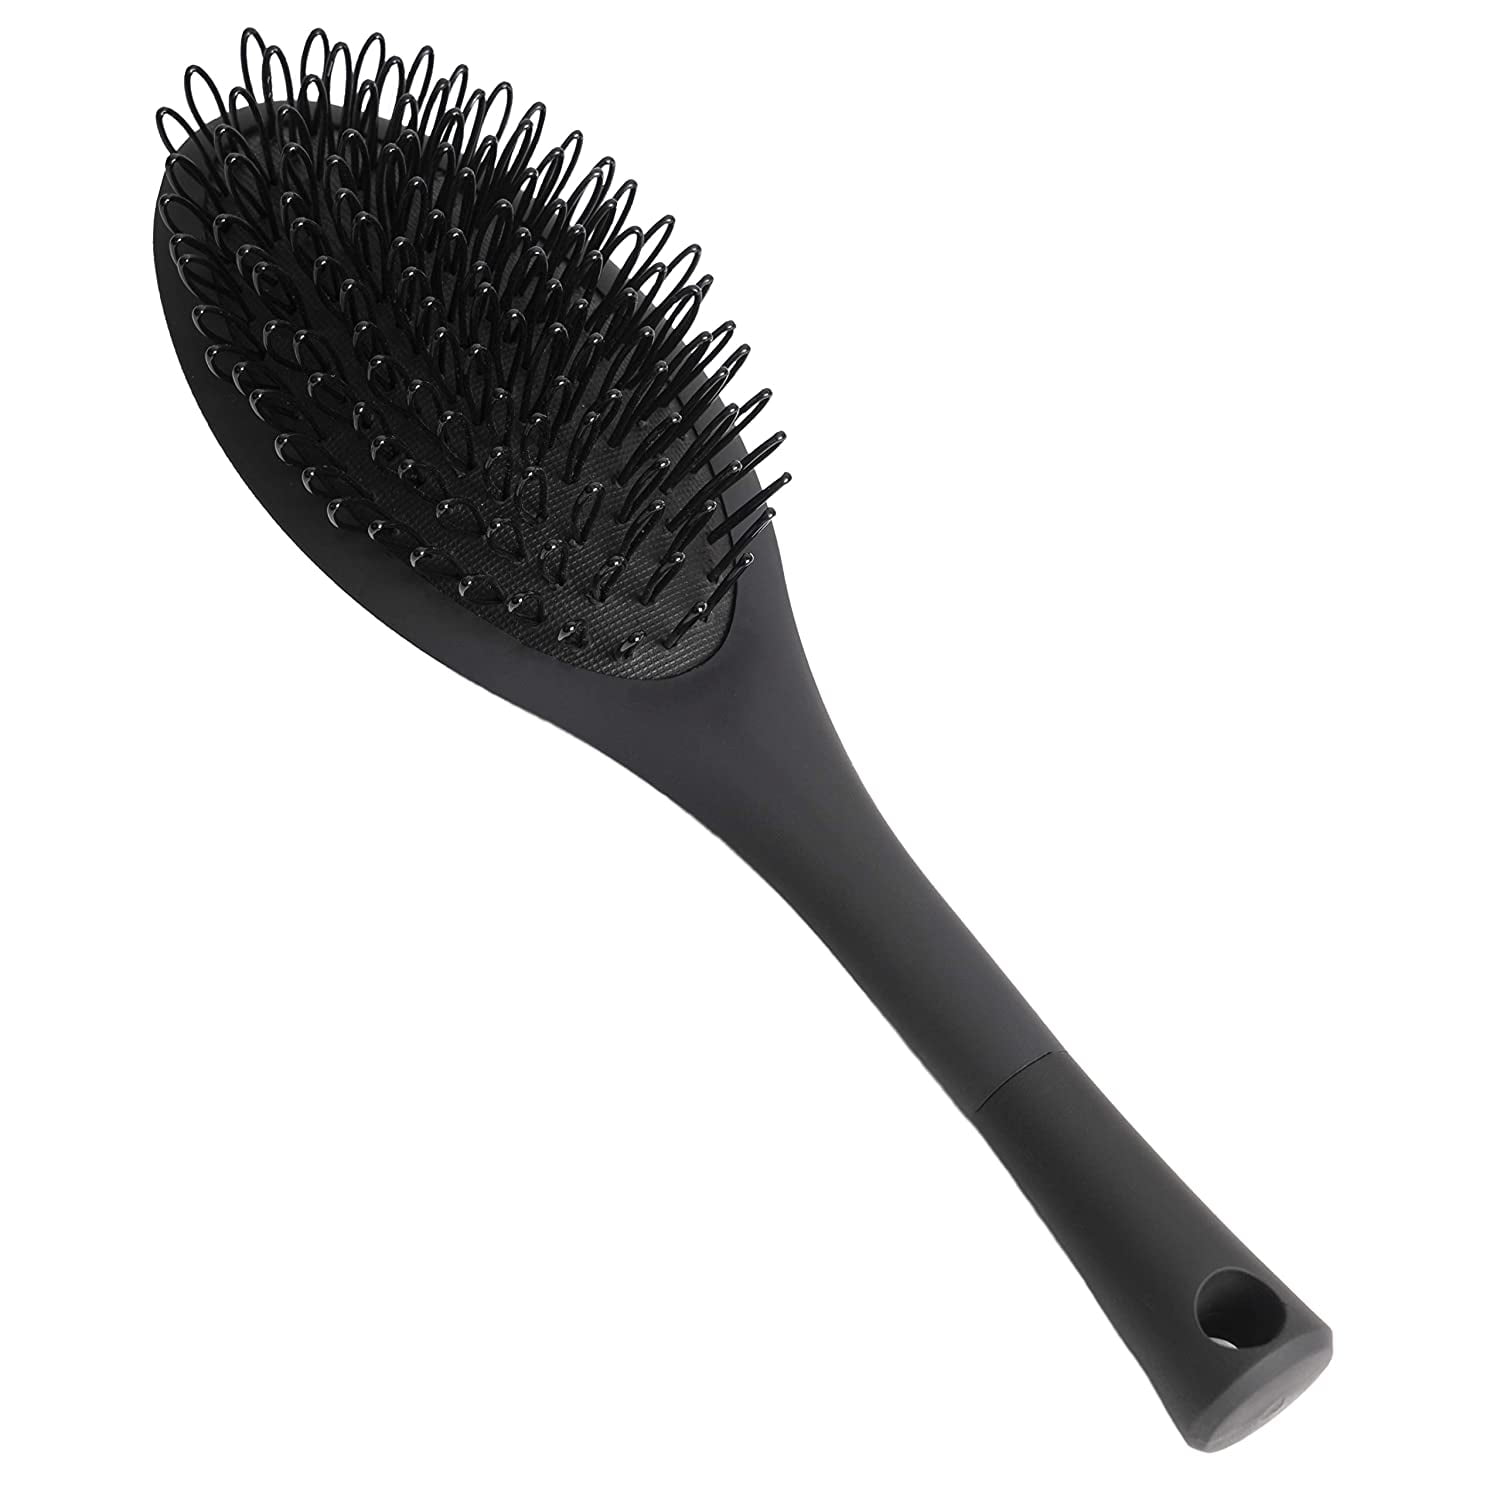 The Hair Shop Black Loop Brush - Salon Professional Grade with Matted Black  and Ergonomic Design - Safe Detangler Tool for 100% Remy Human and  Synthetic Hair Extensions and Wigs 